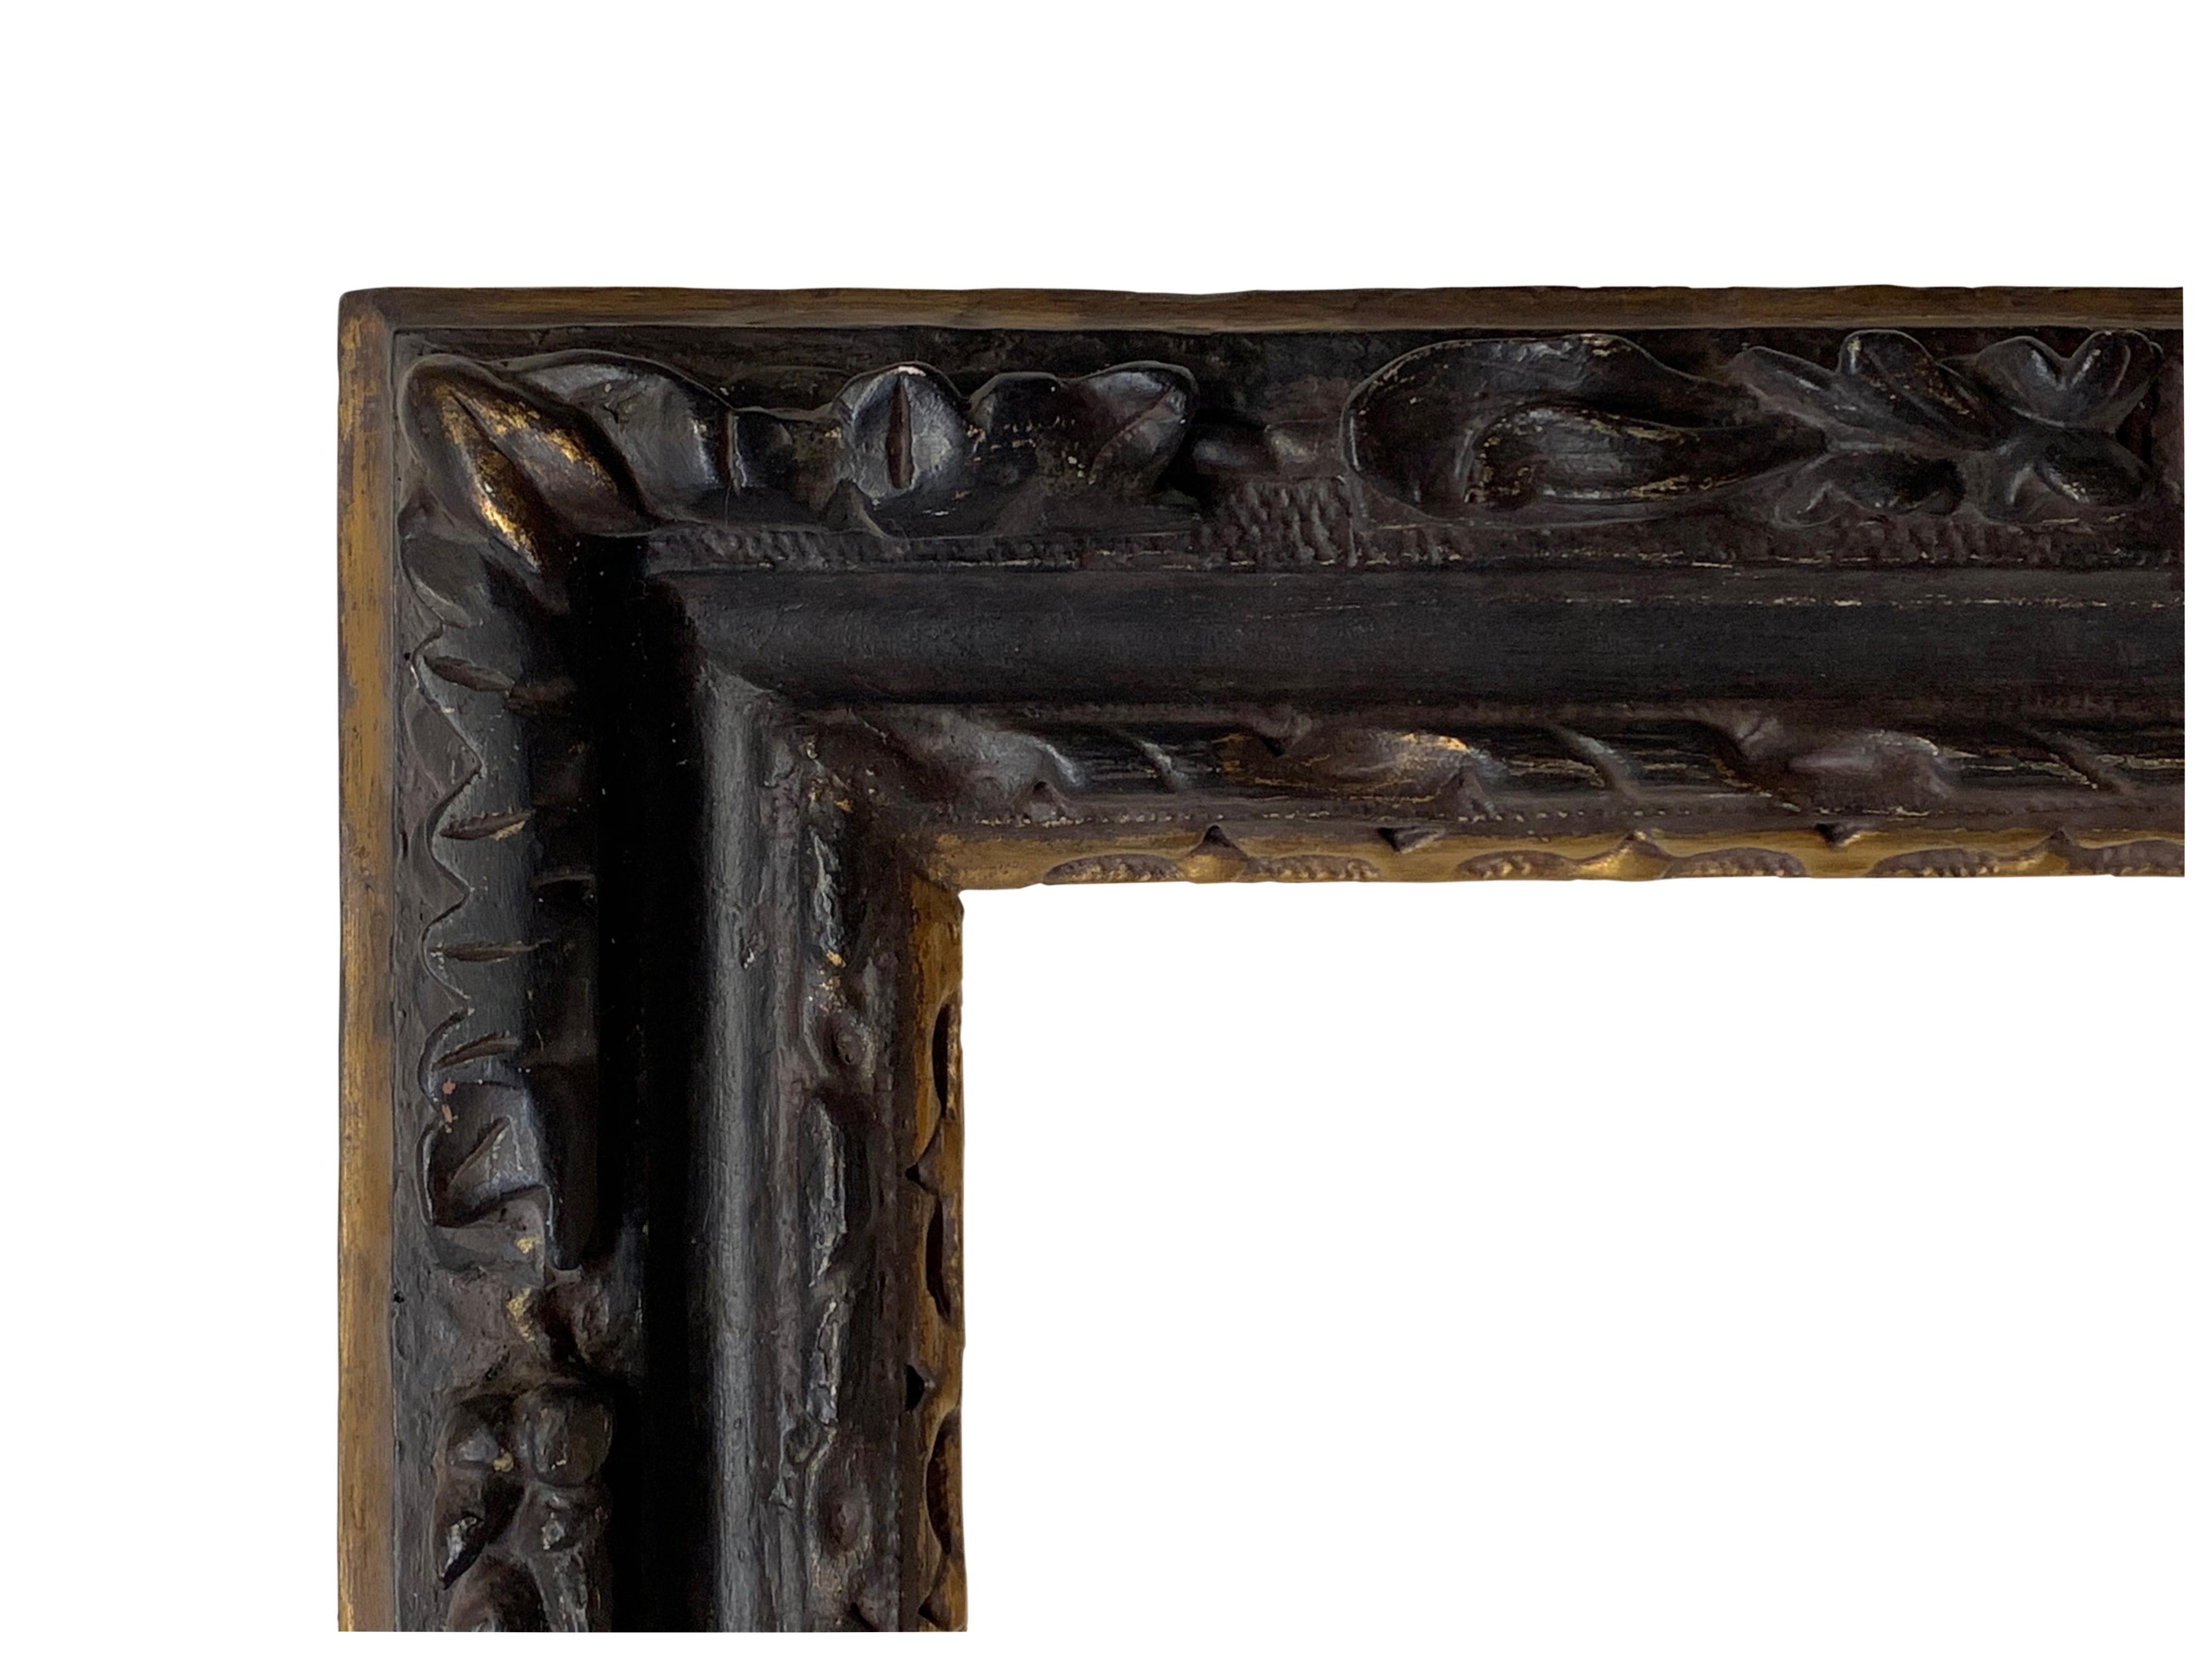 This ebonized frame was carved with an oak leaf and acorn motif in the late 1600s-early 1700s. 

Rabbet dimensions: 26.5